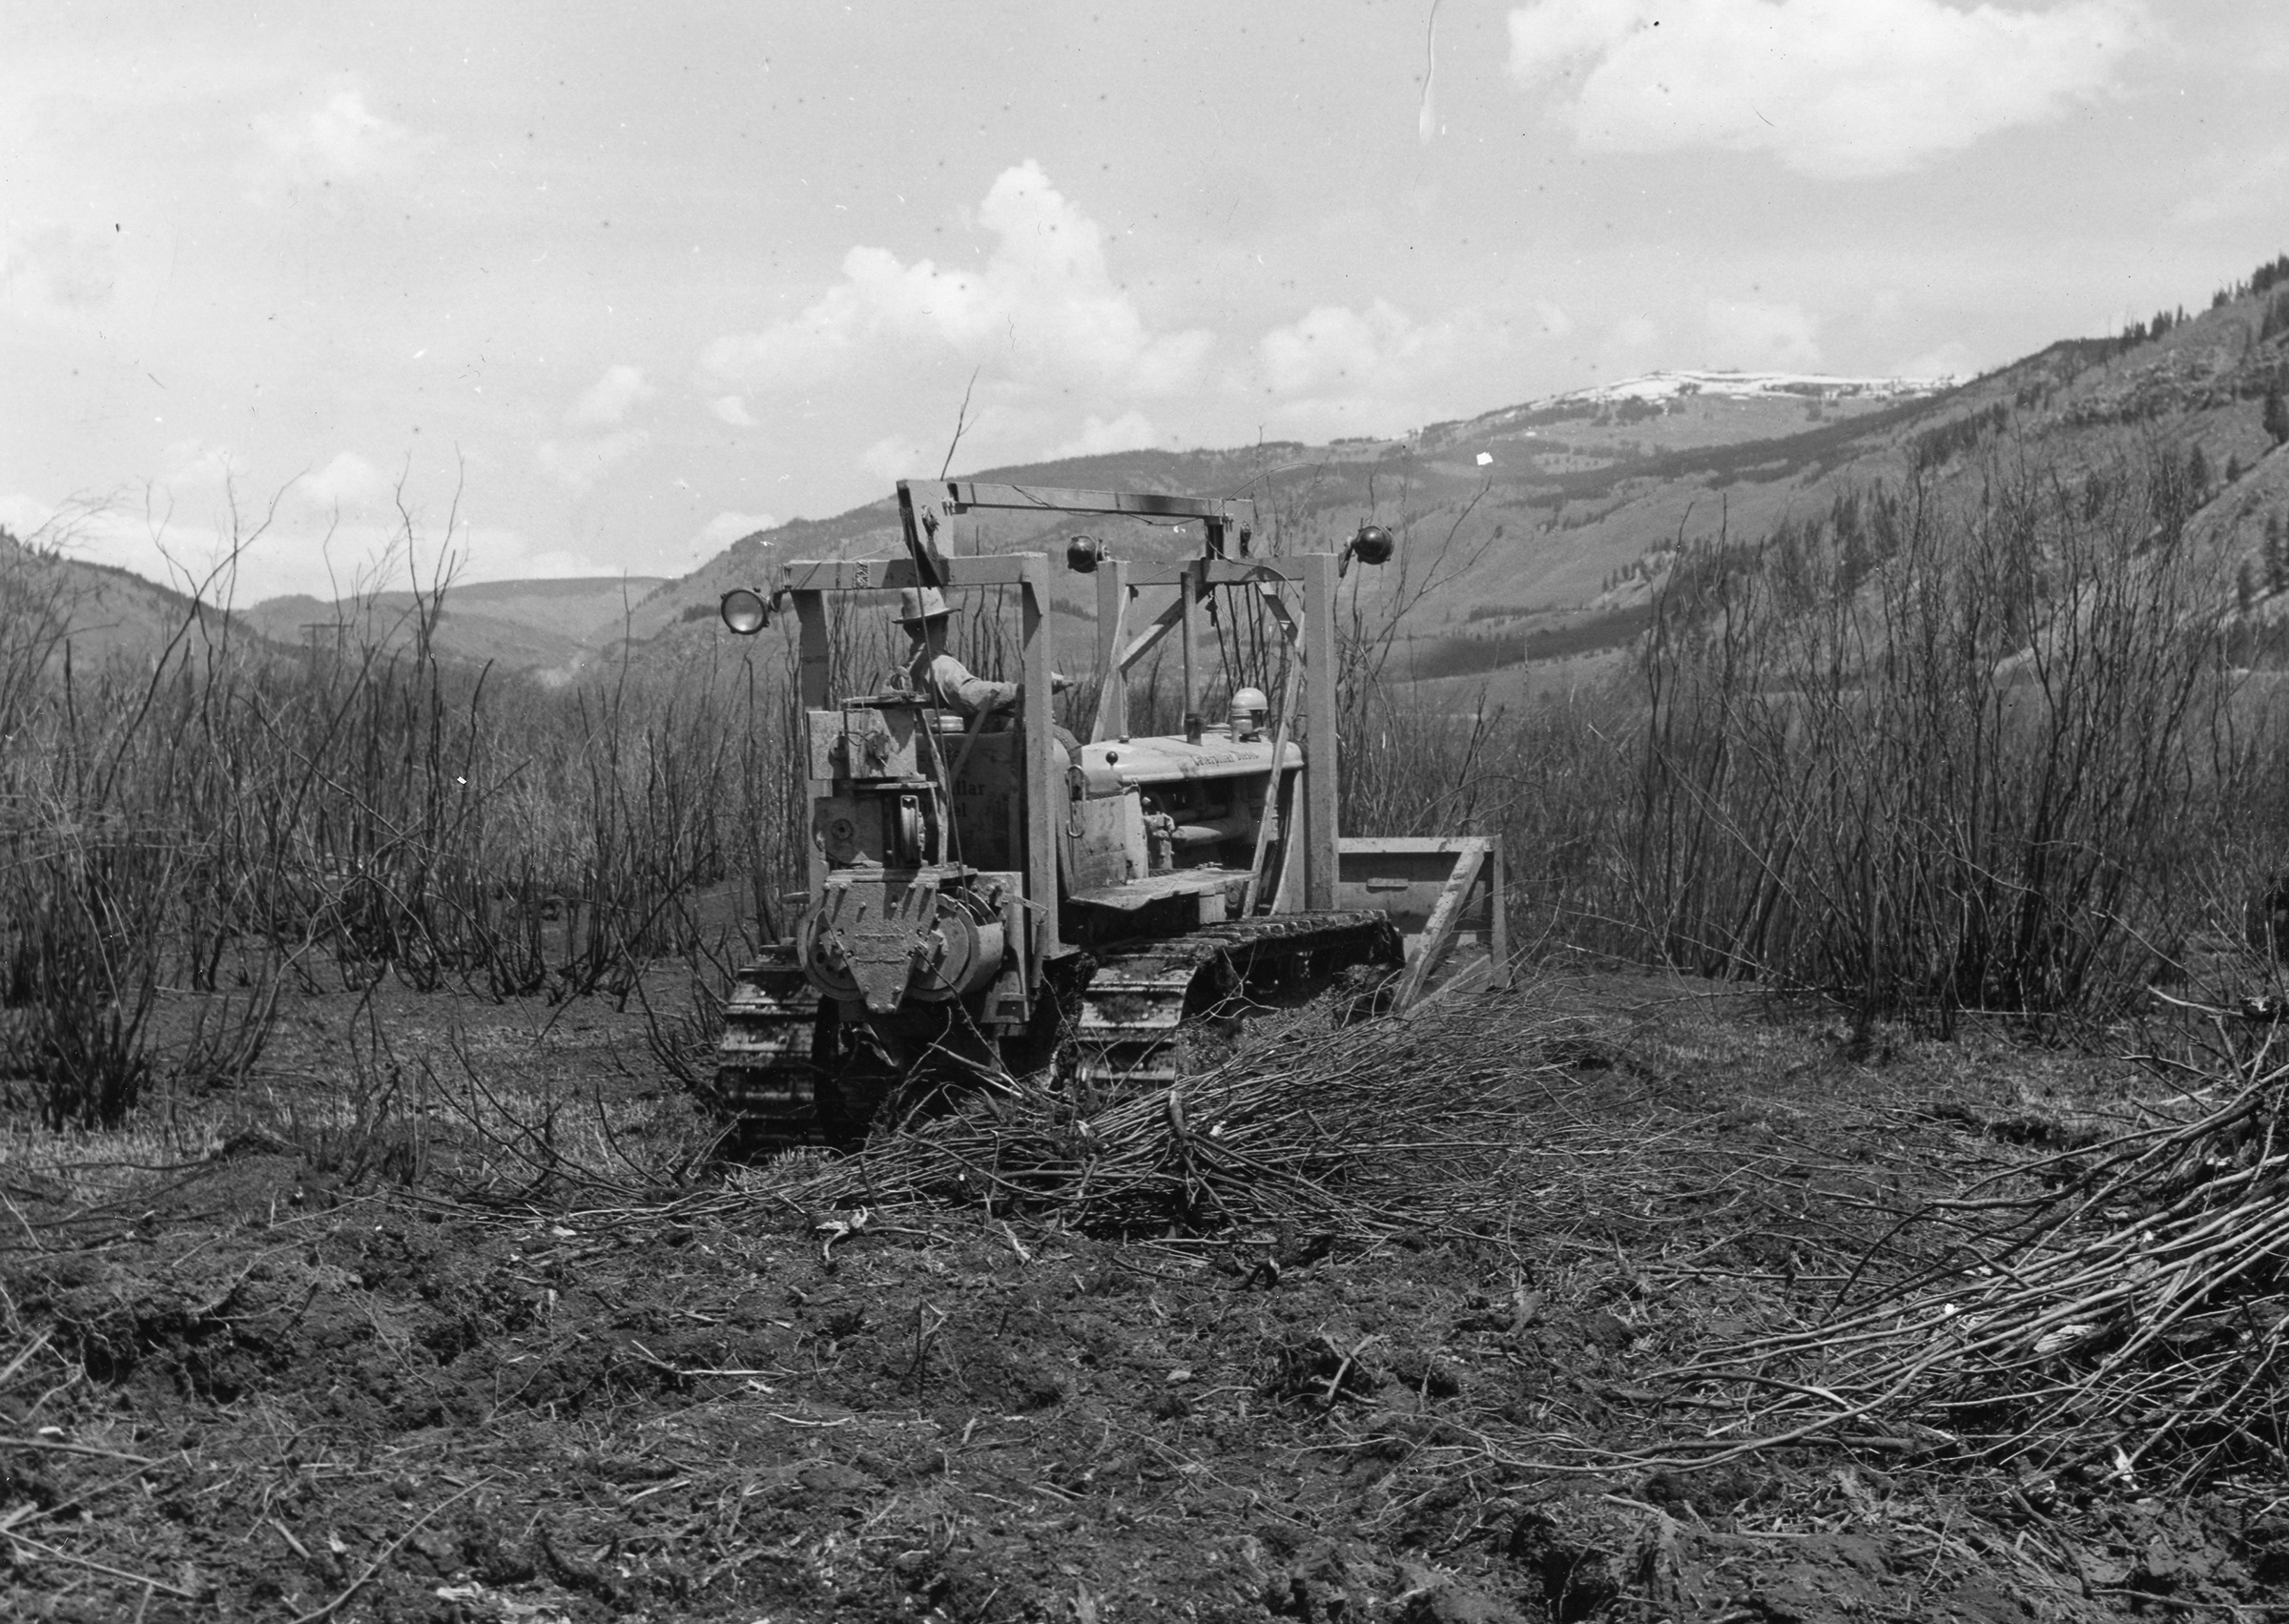 A bulldozer in the Pando valley, clearing foliage.